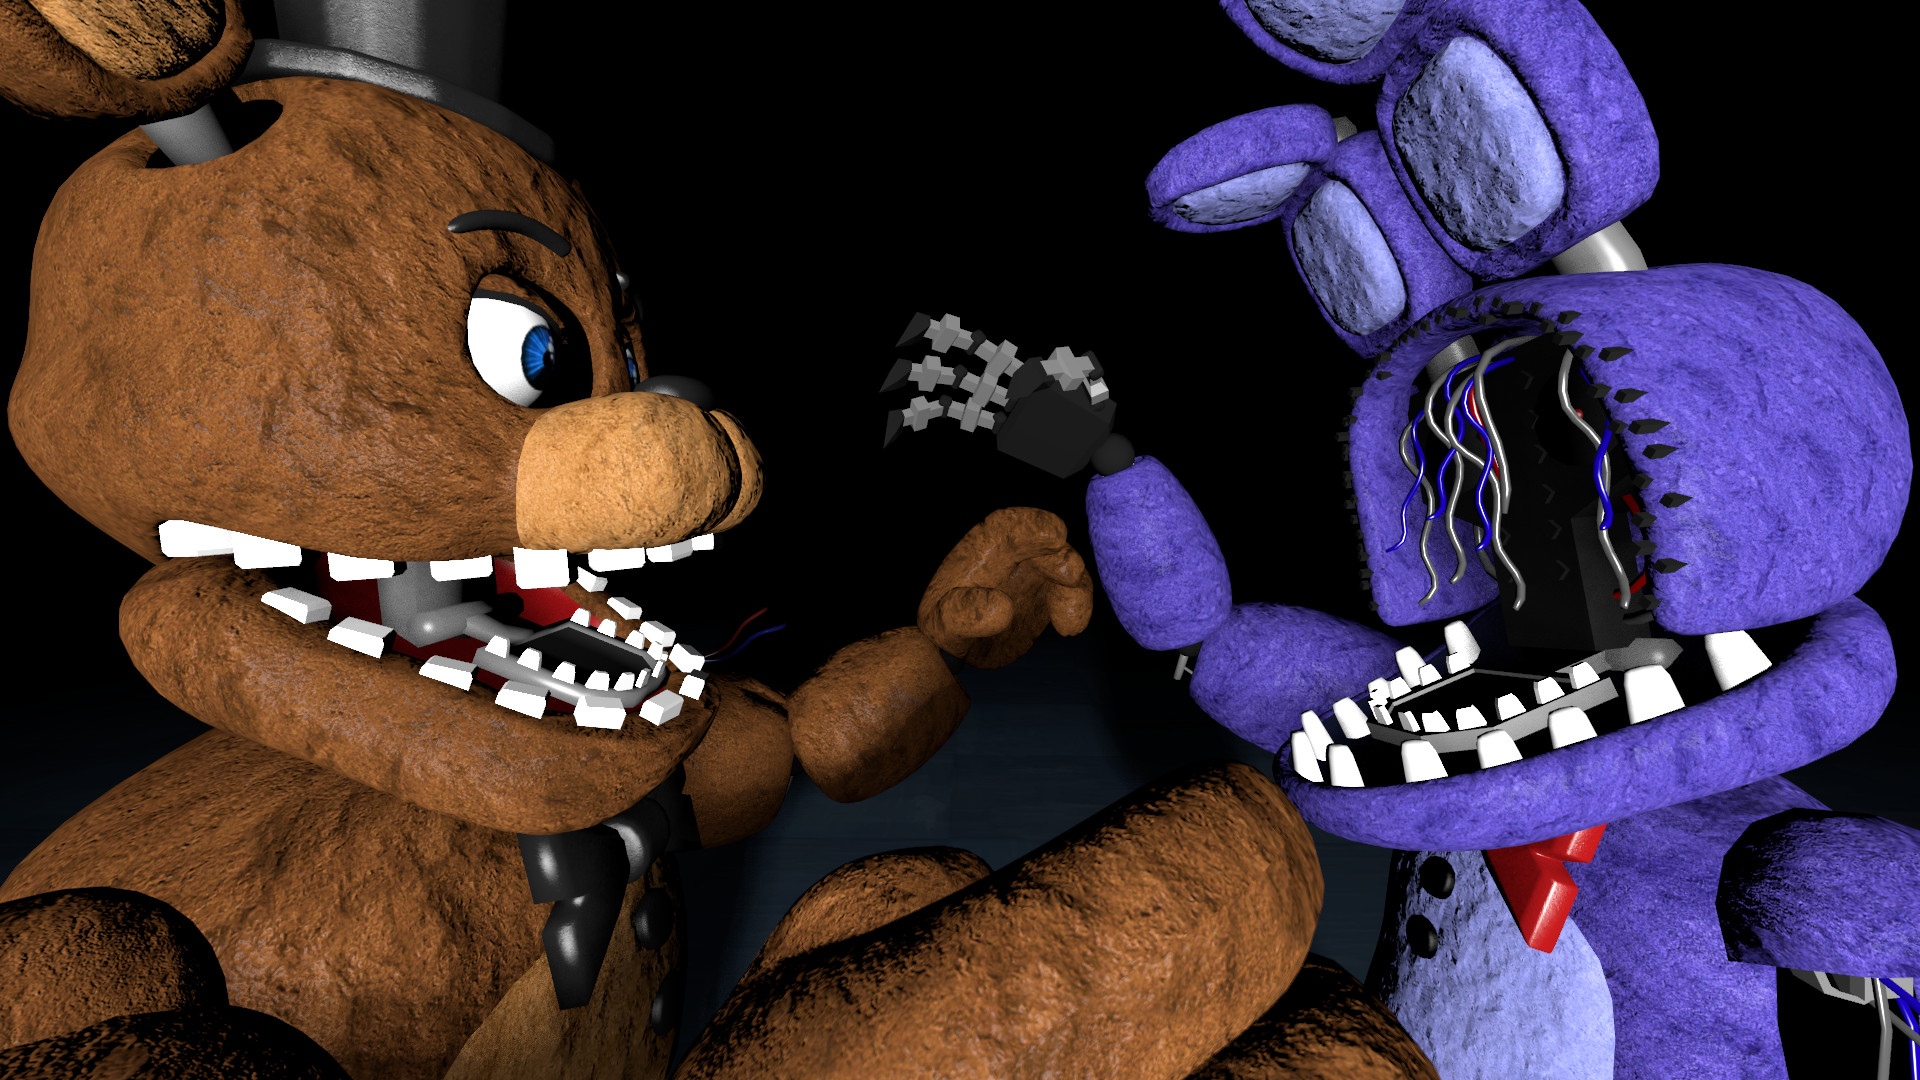 withered Freddy by Xyberia